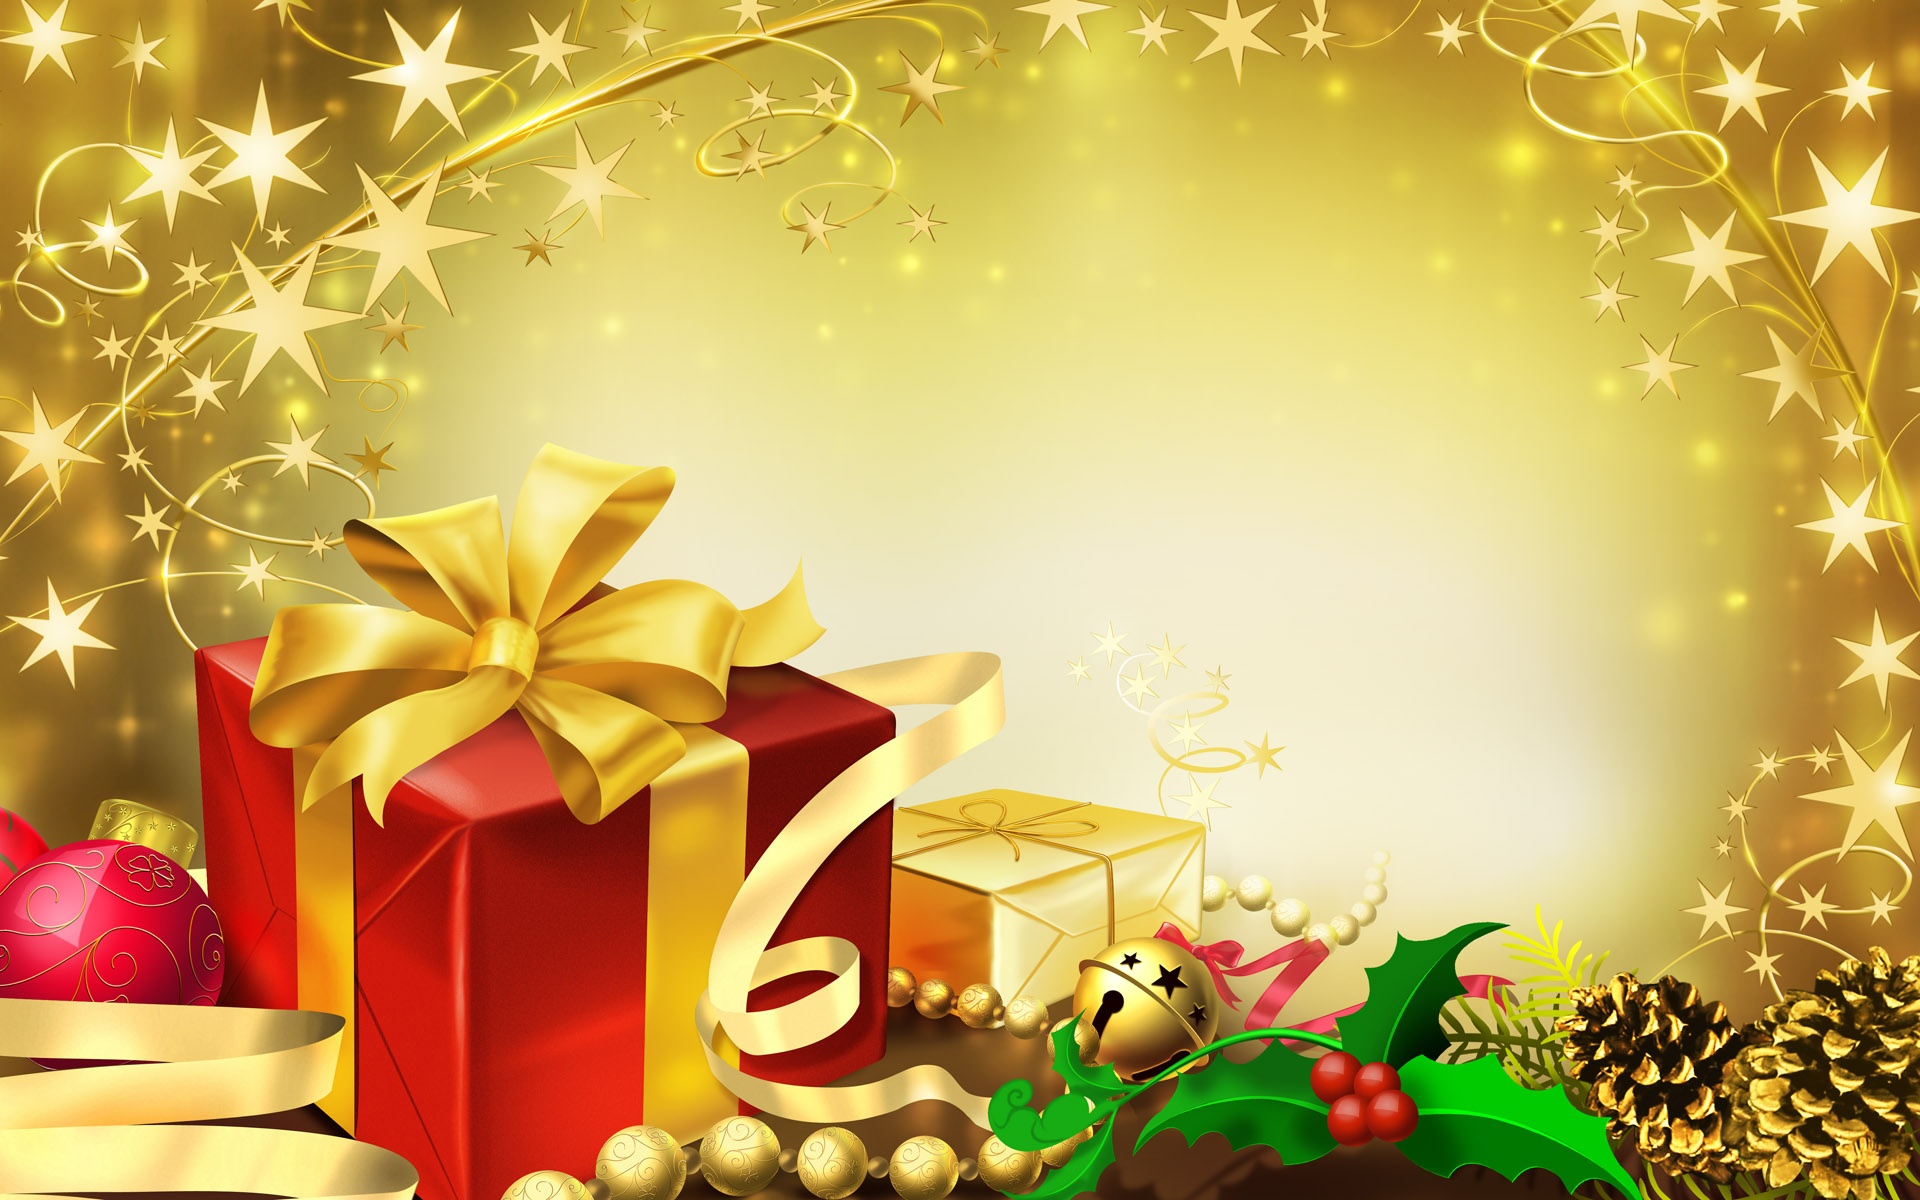 Colorful Gifts For Christmas Wallpaper In Jpg Format